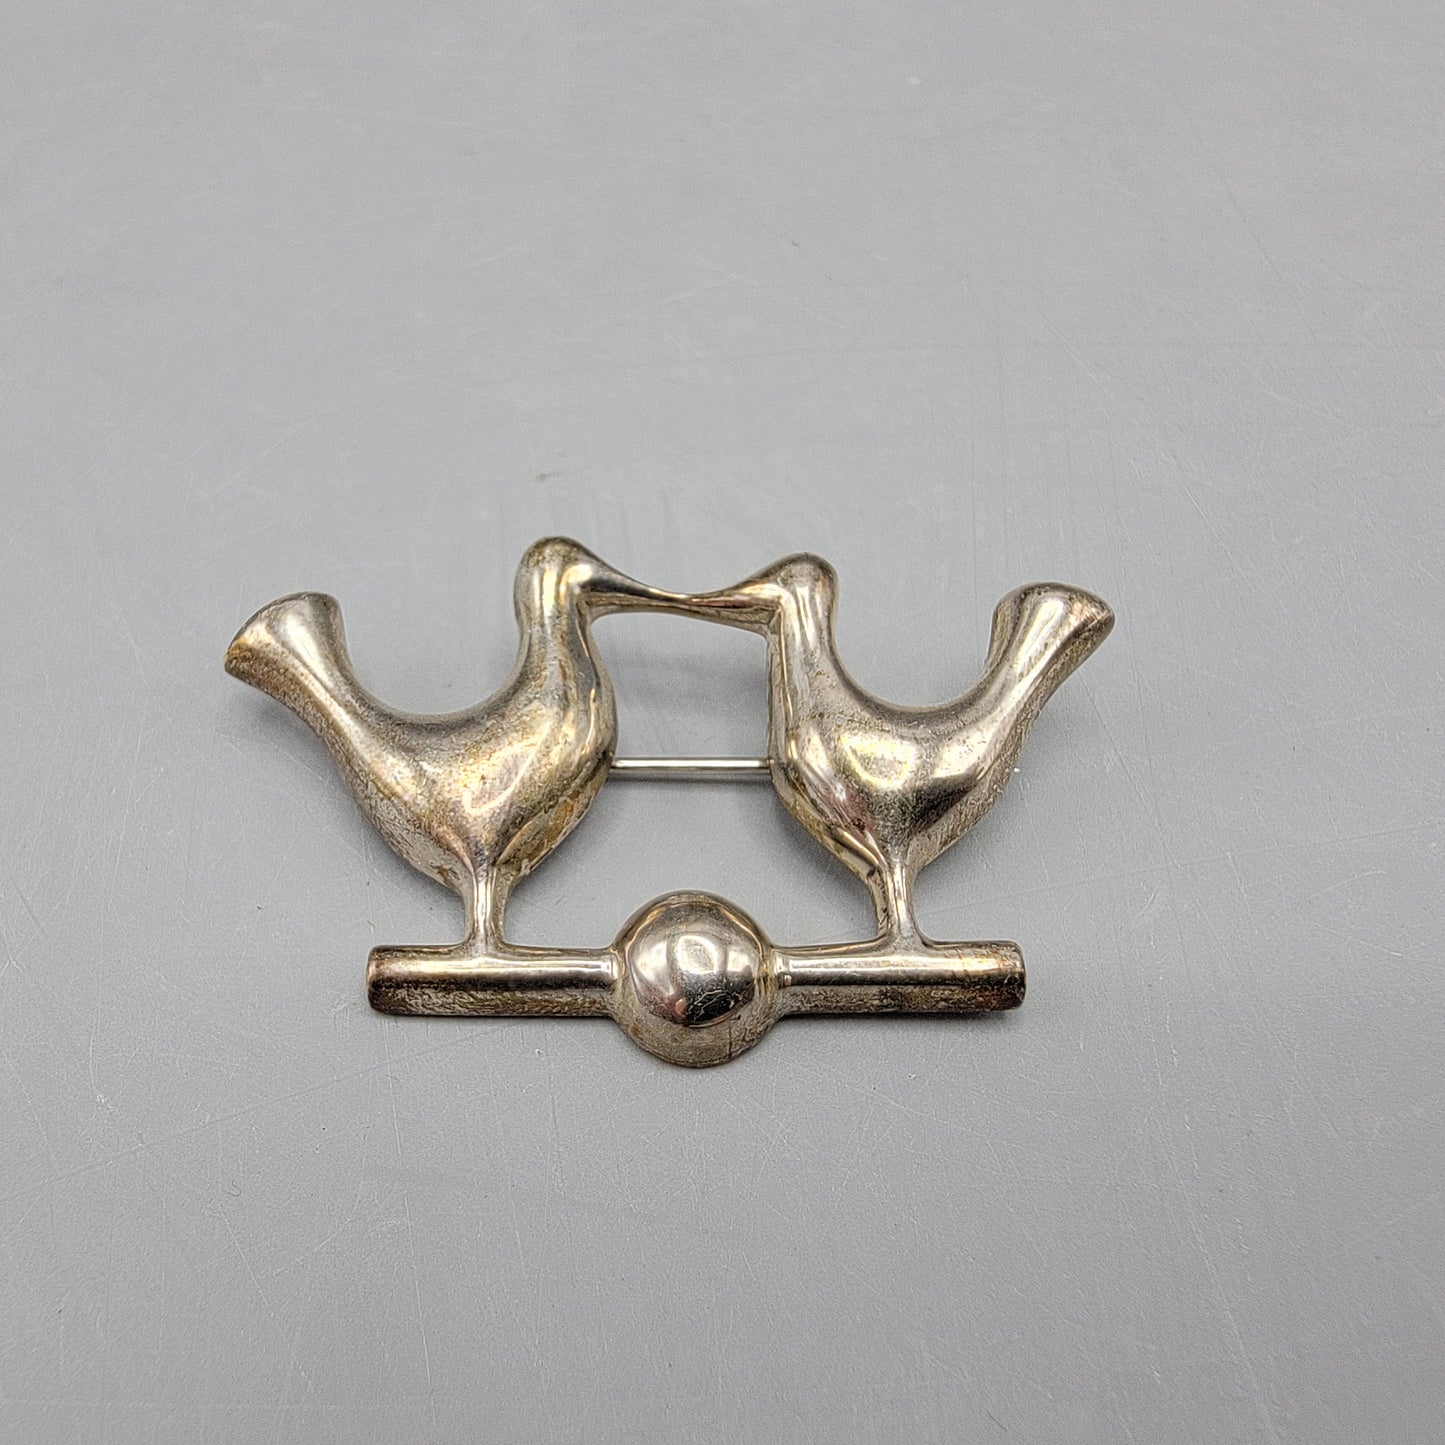 Vintage Sterling Silver Pin of 2 Birds on Branch